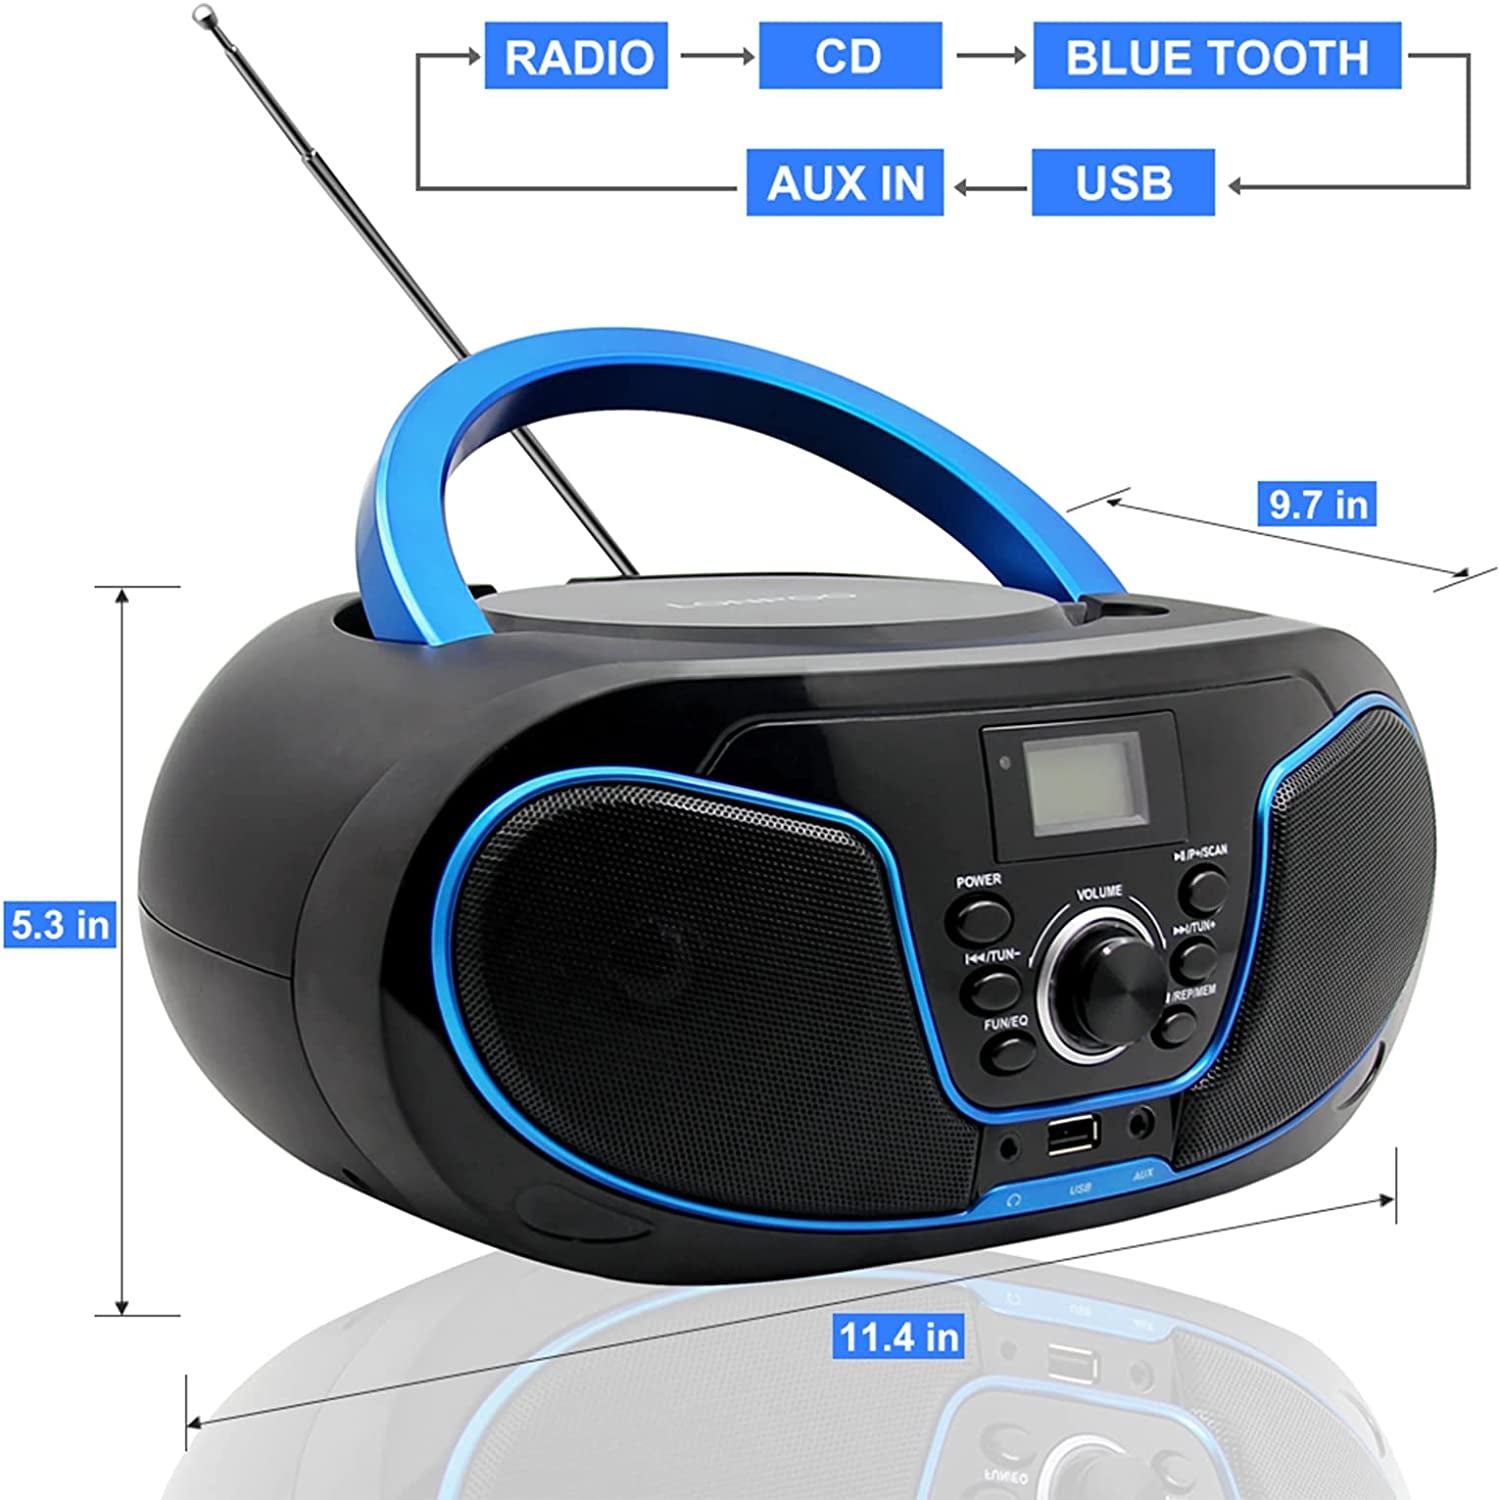  Portable Bluetooth CD Boombox with FM Radio, USB Playback, Aux Input, Earphone Output, and Digital Tuner